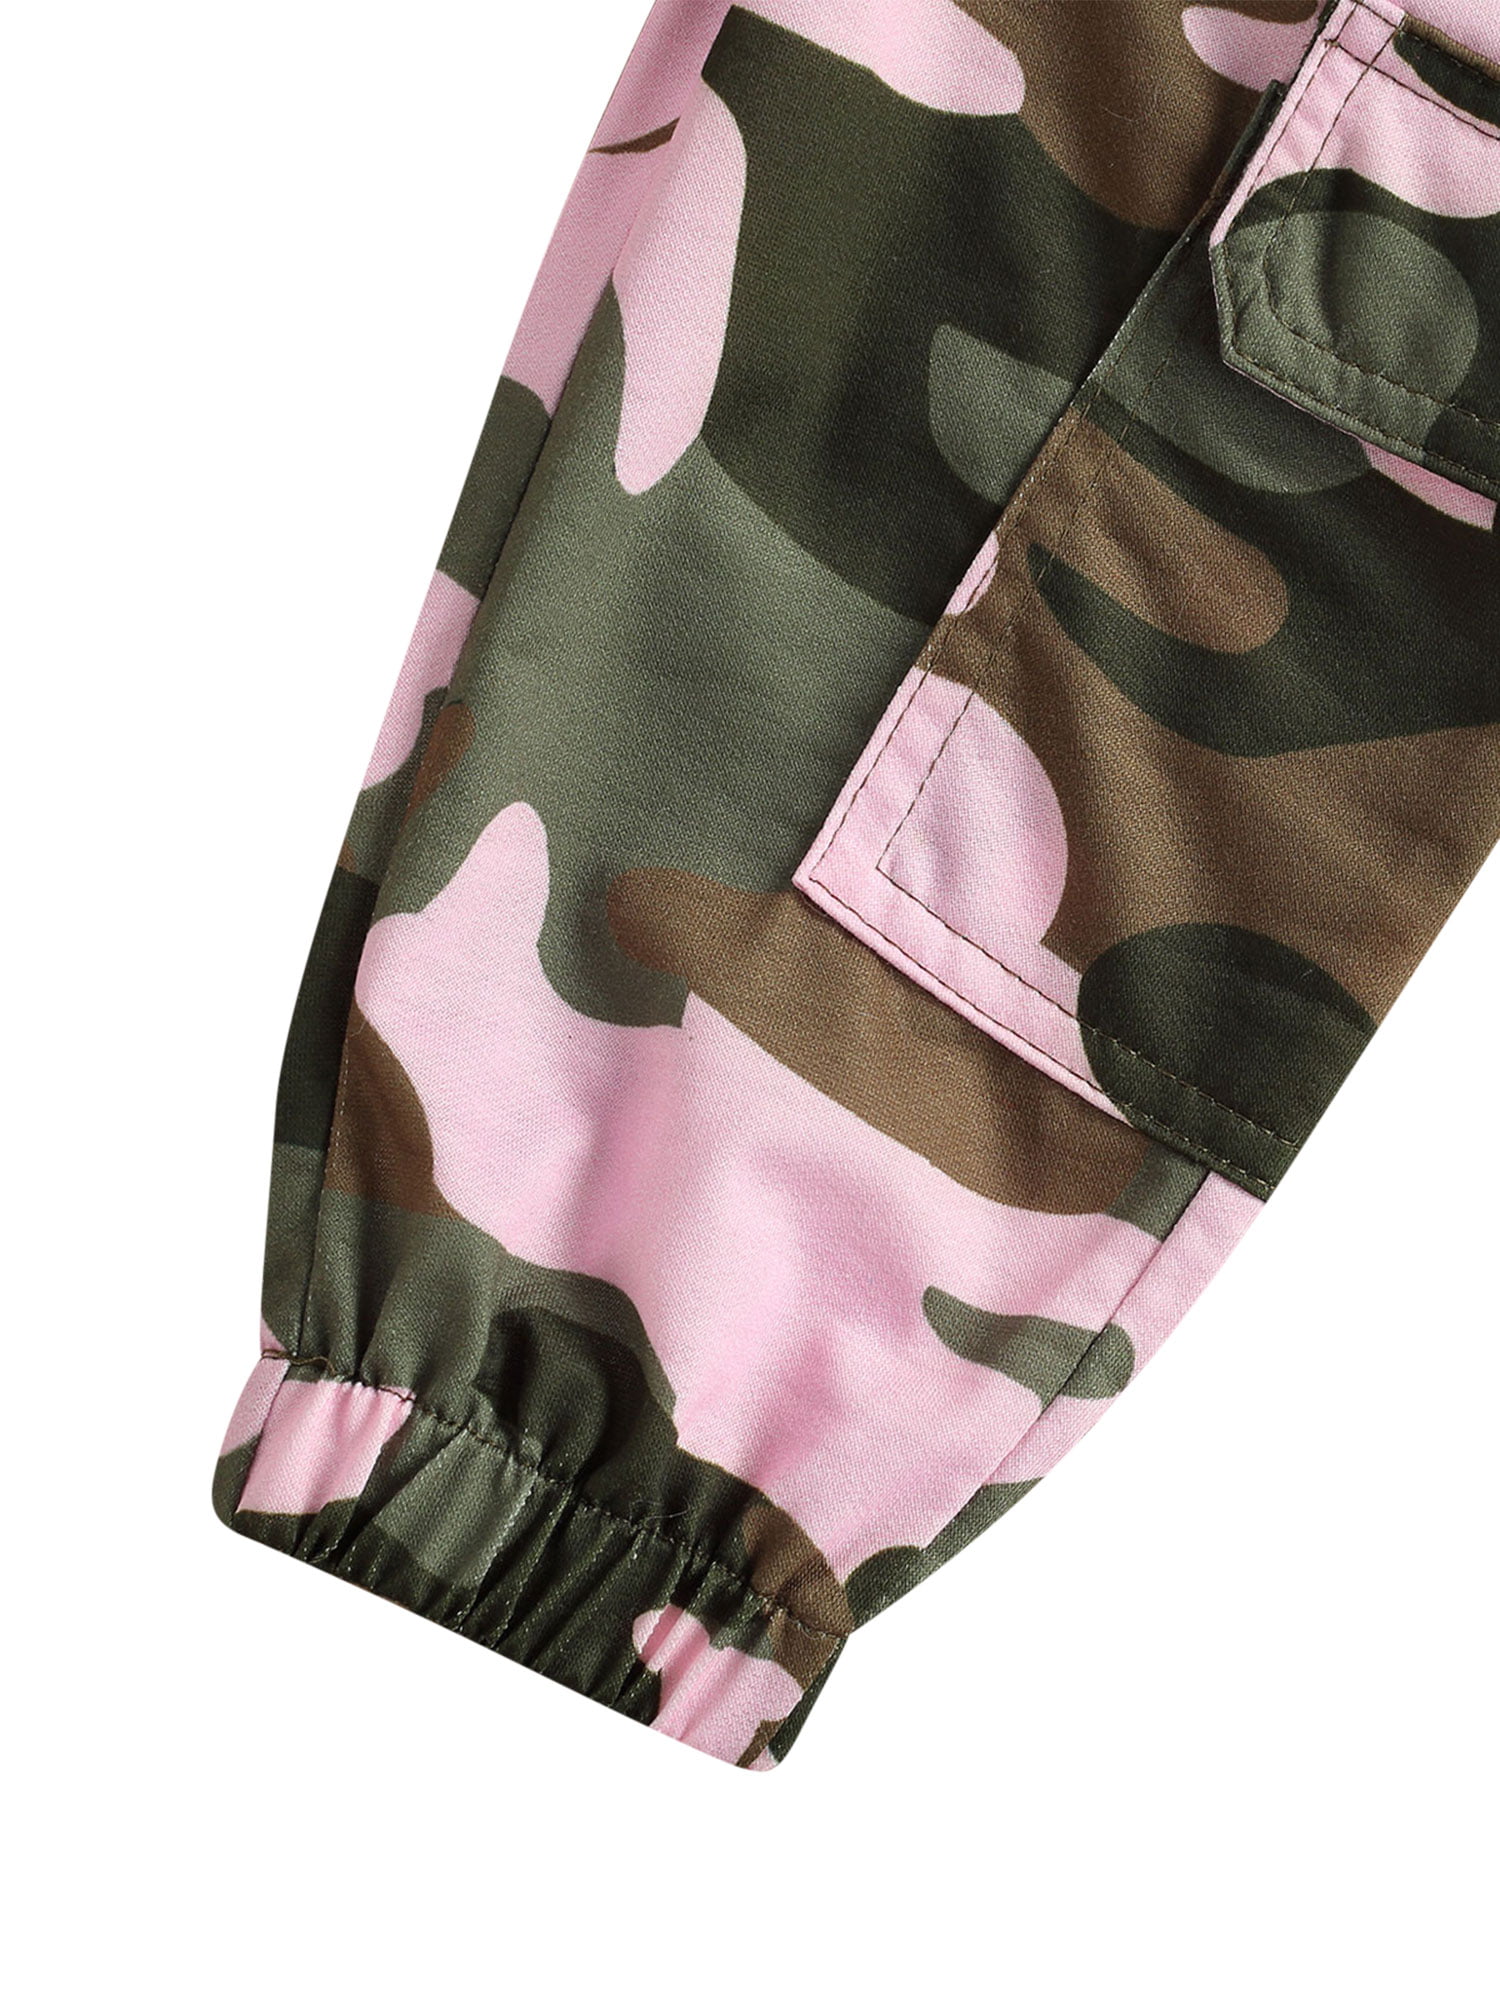 Pants For Girls Spring Autumn Kids Girls Pants Camouflage Patter Sweatpants  For Children Teenage Clothes Girl 210303 From Jiao08, $13.09 | DHgate.Com